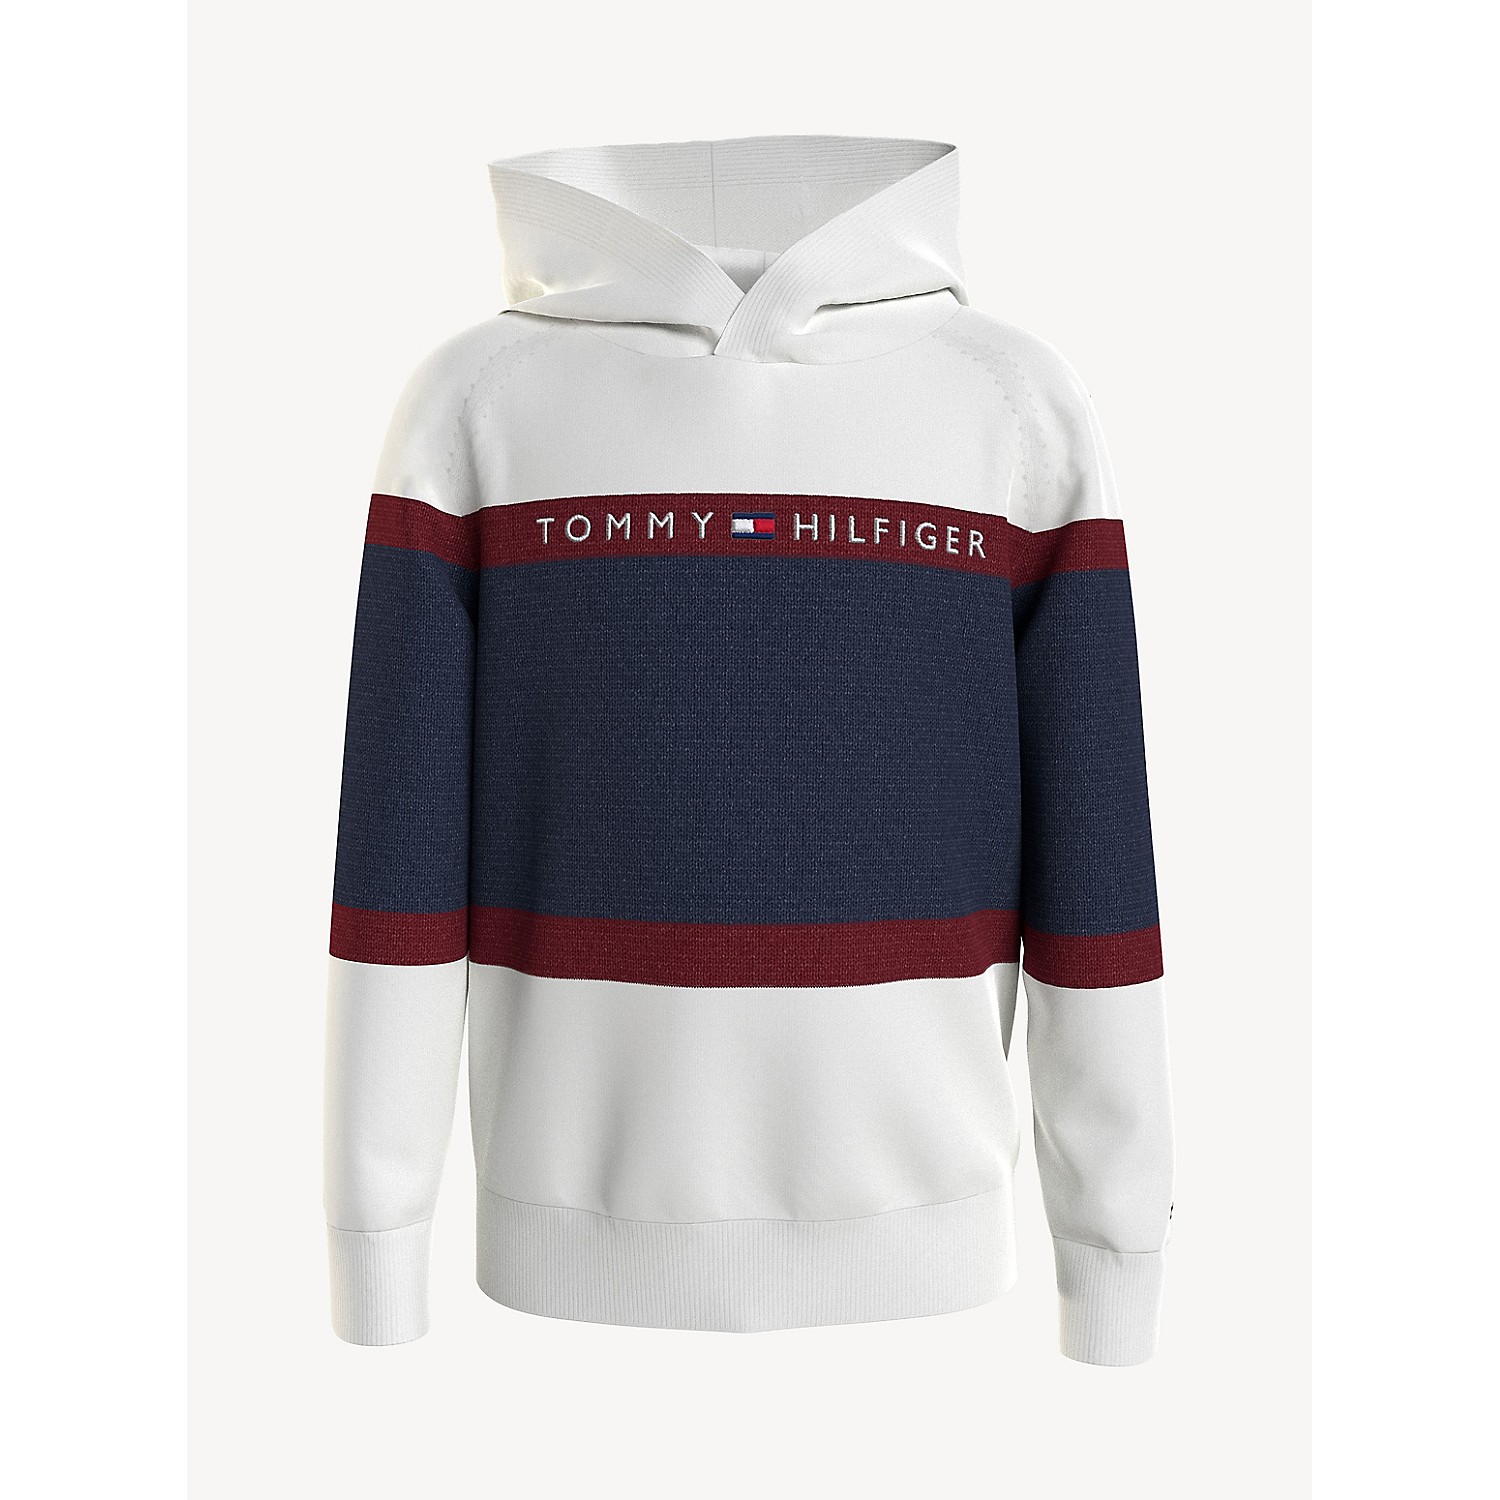 TOMMY HILFIGER Kids Colorblock Hooded Sweater